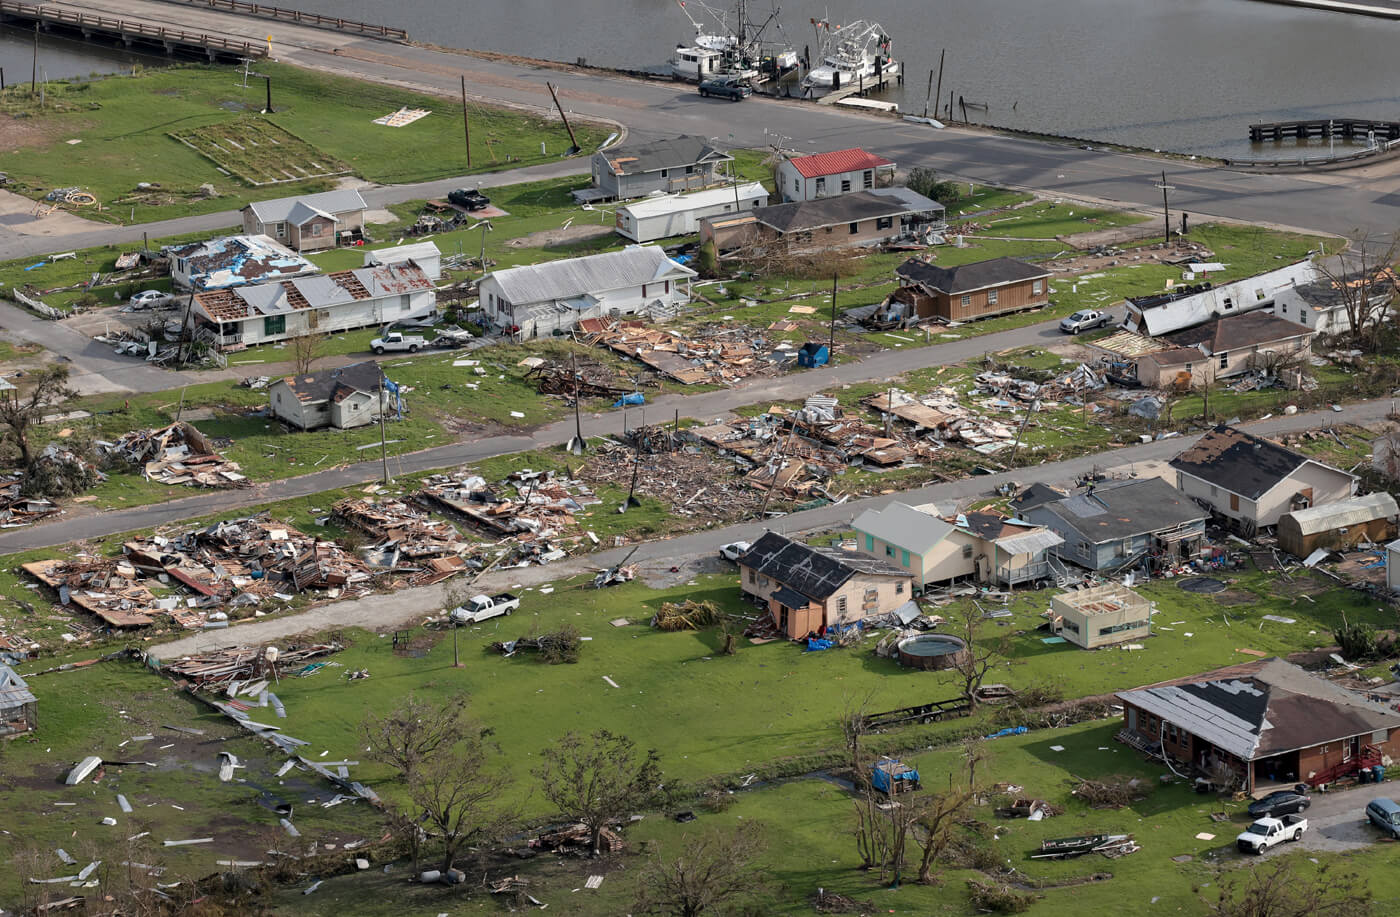 Catastrophic damage to Houses and infrastructure during Category 4 storms